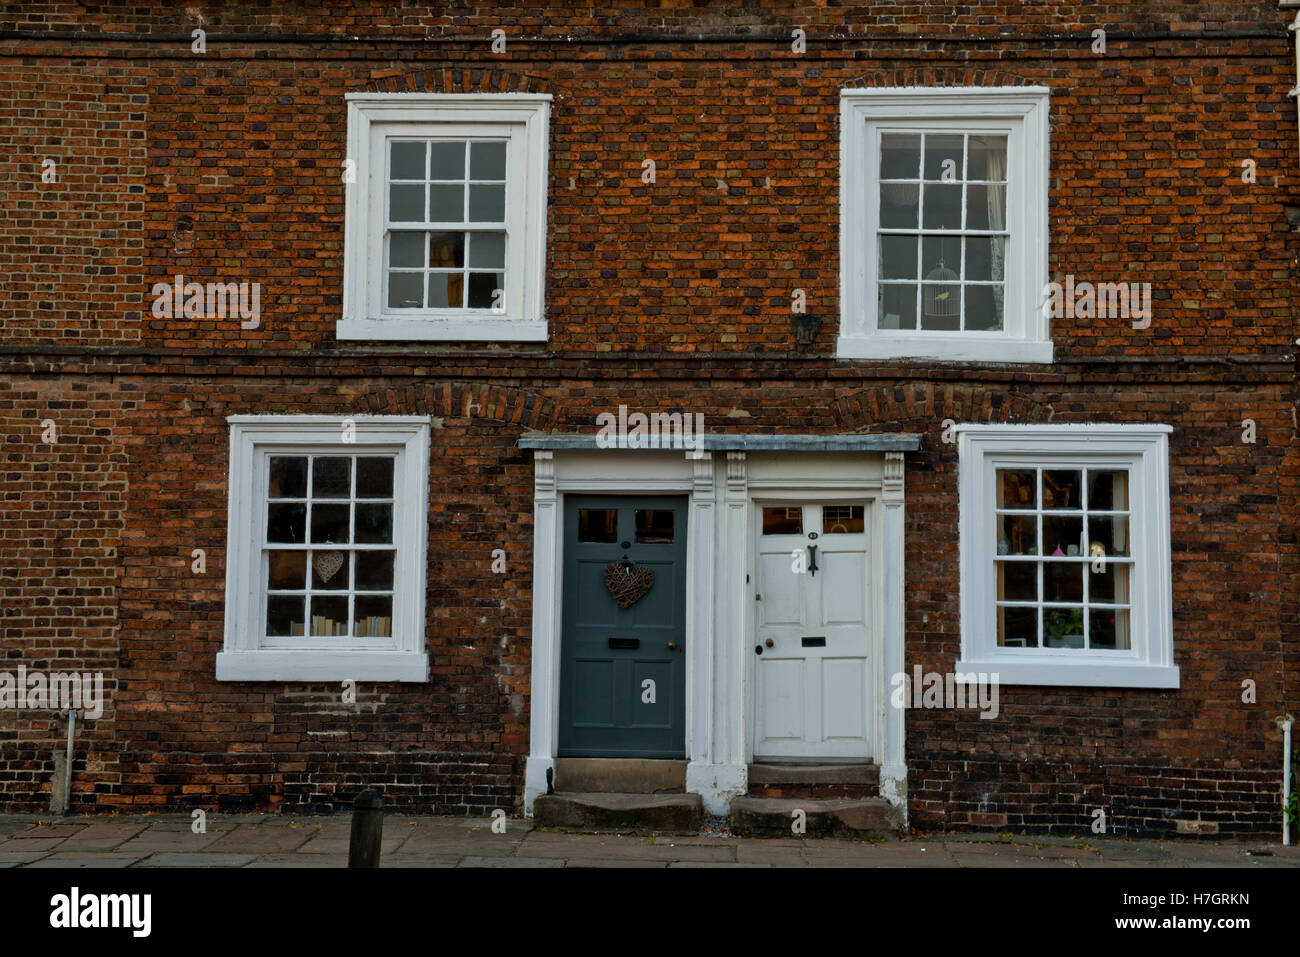 Georgian architecture in the town of Ashbourne, Derbyshire, UK Stock Photo